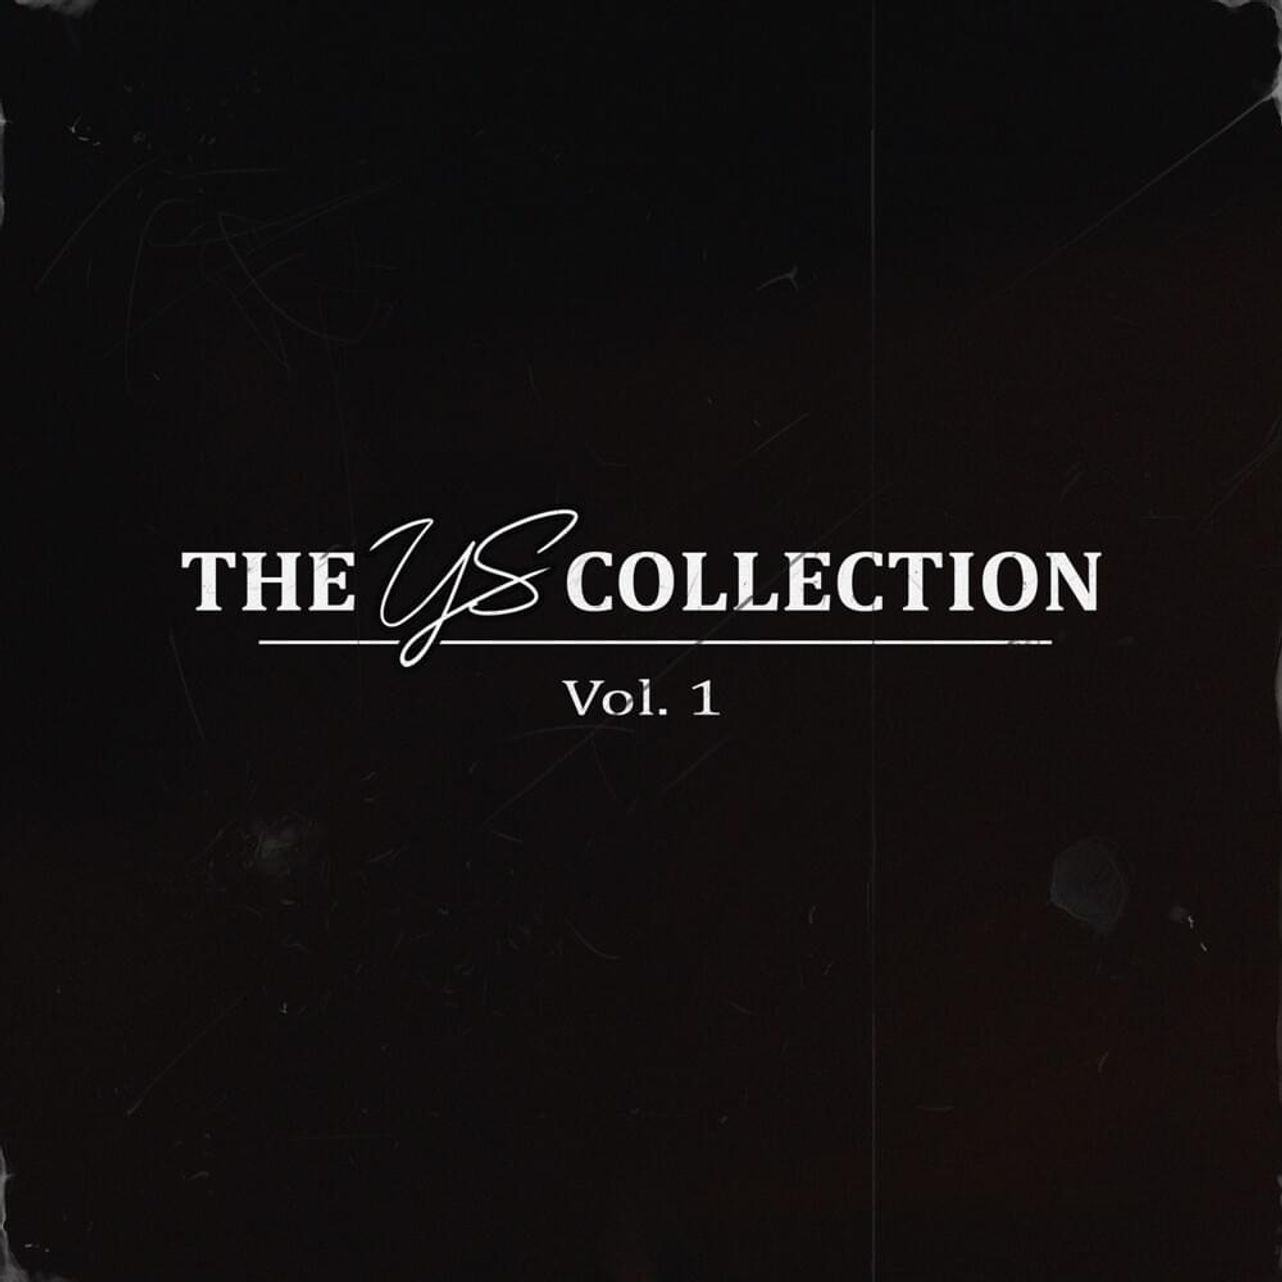 YS Collections Vol. 1